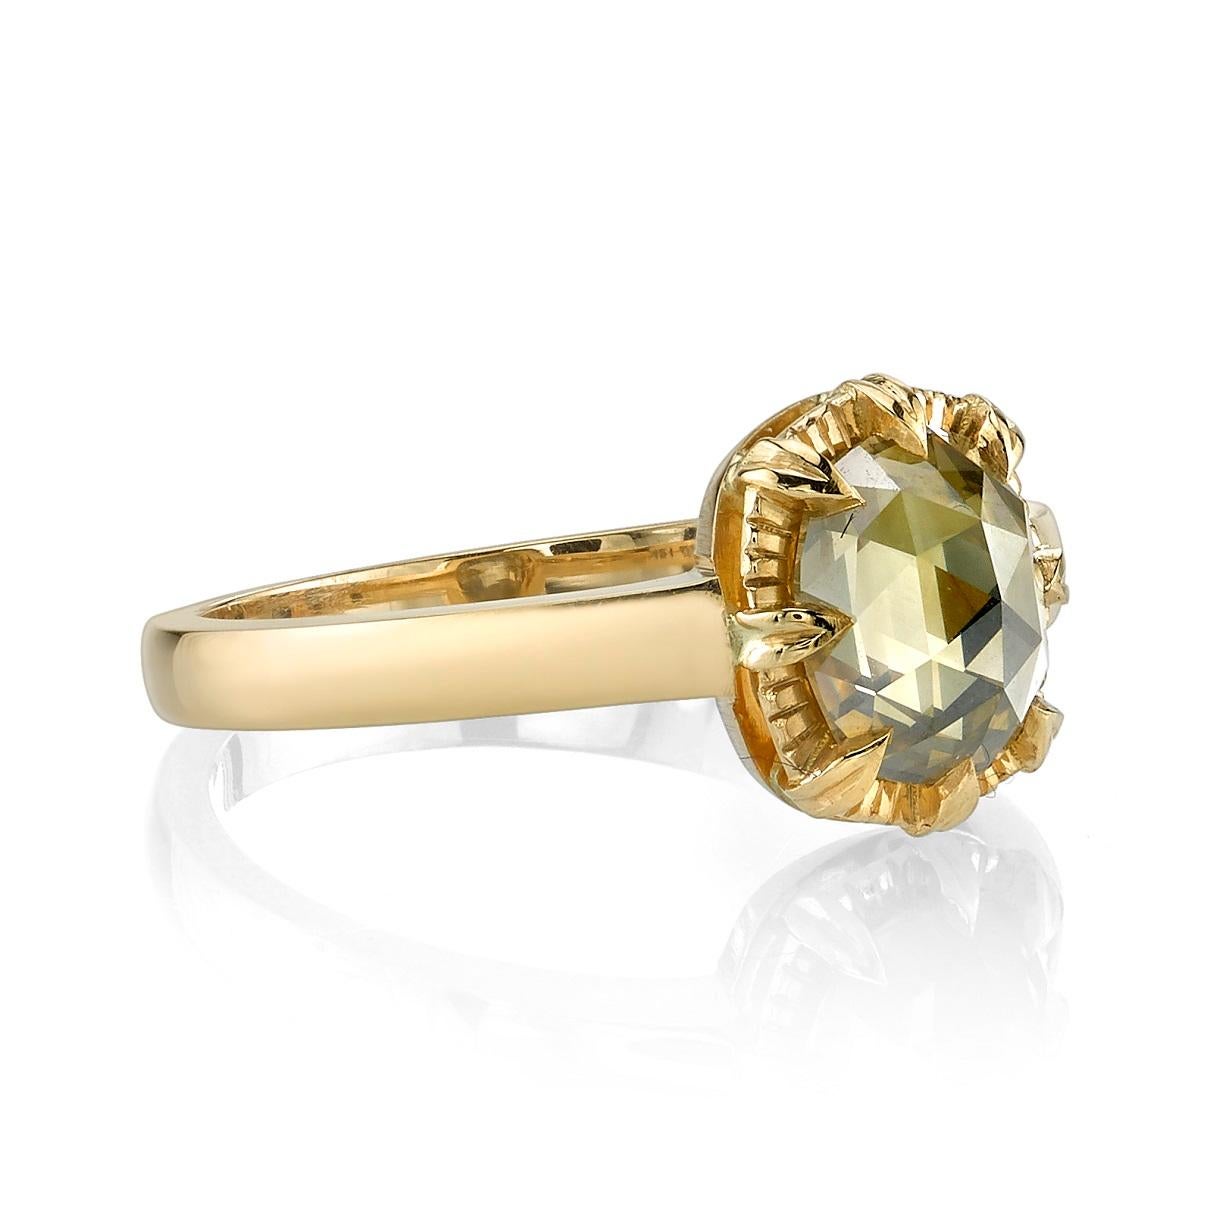 1.17ct Cushion shaped Rose cut diamond set in a handcrafted 18K yellow gold mounting. Ring is currently a size 6 and can be sized to fit. 